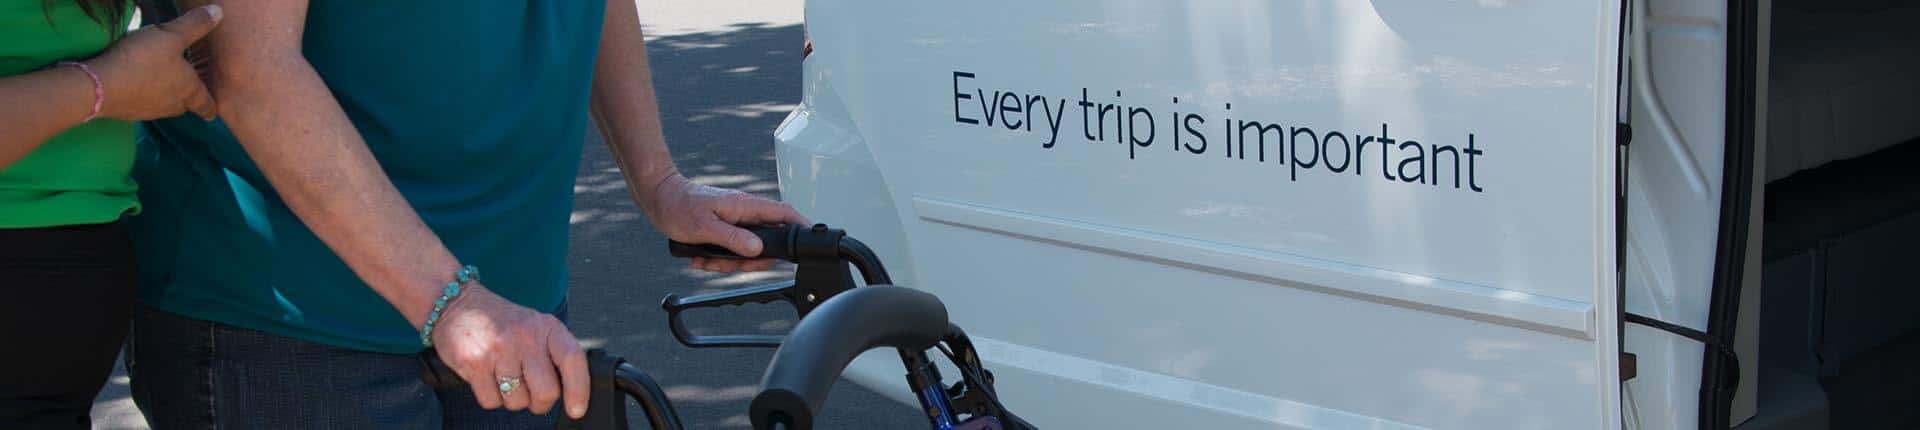 Person in wheelchair next to para transit bus reading "Eavry trip is important"